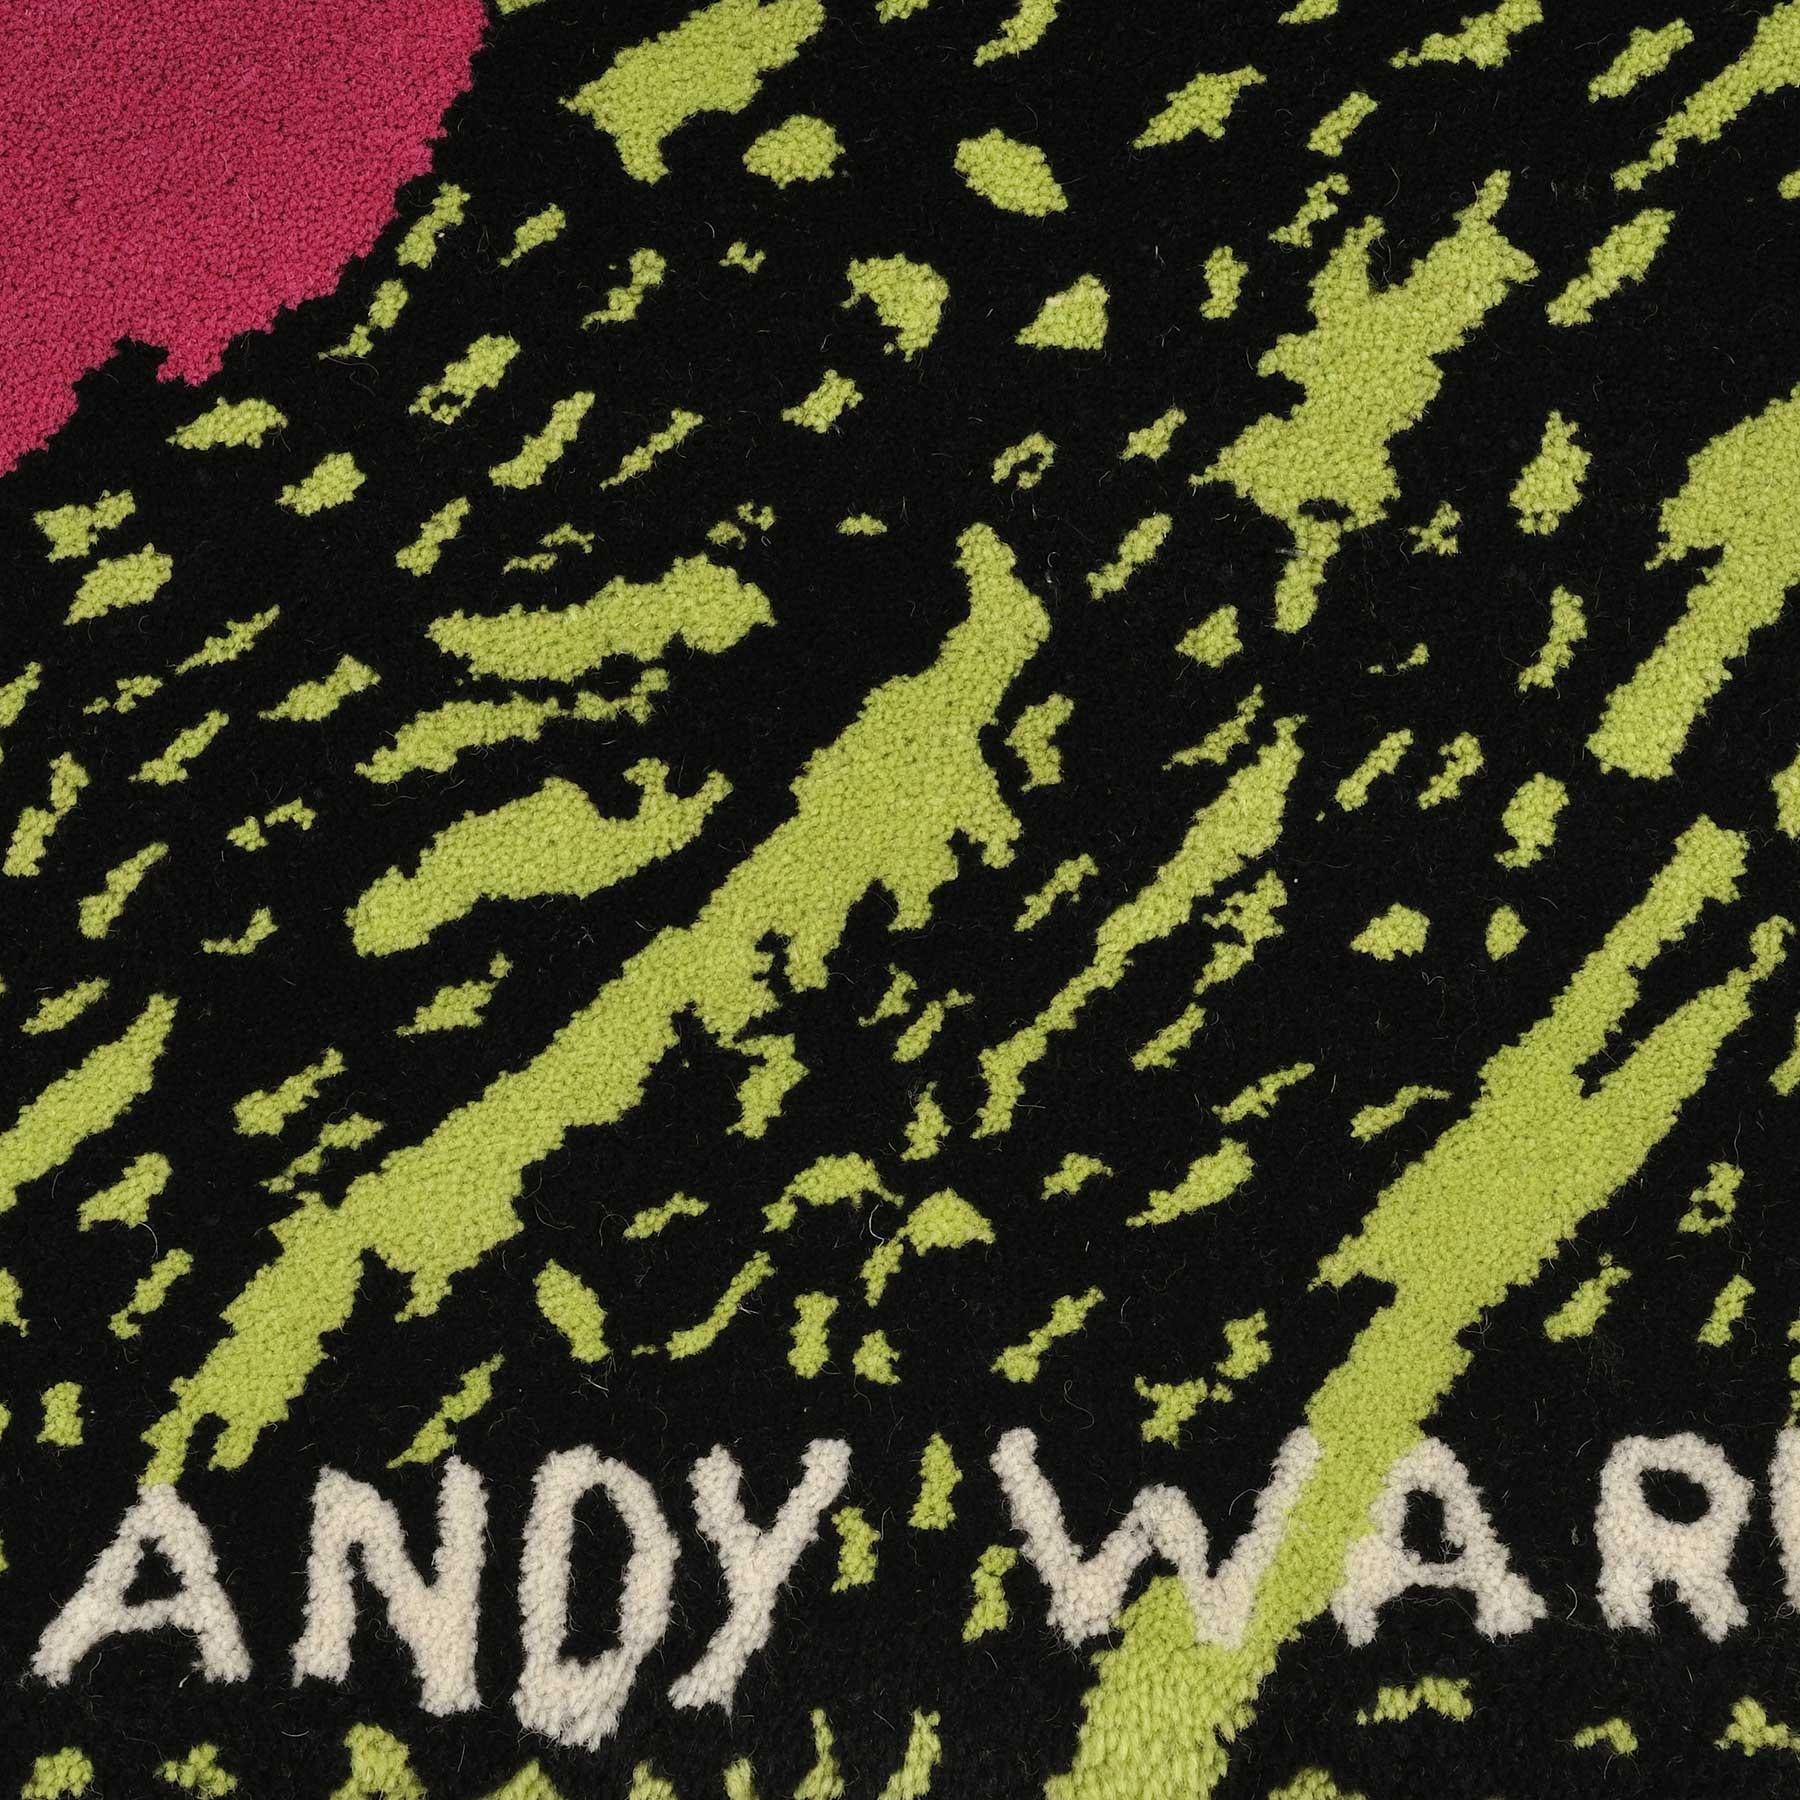 Flowers, After Andy Warhol-Pop Art, Tapestry, Edition, Contemporary, Design, Gif 4